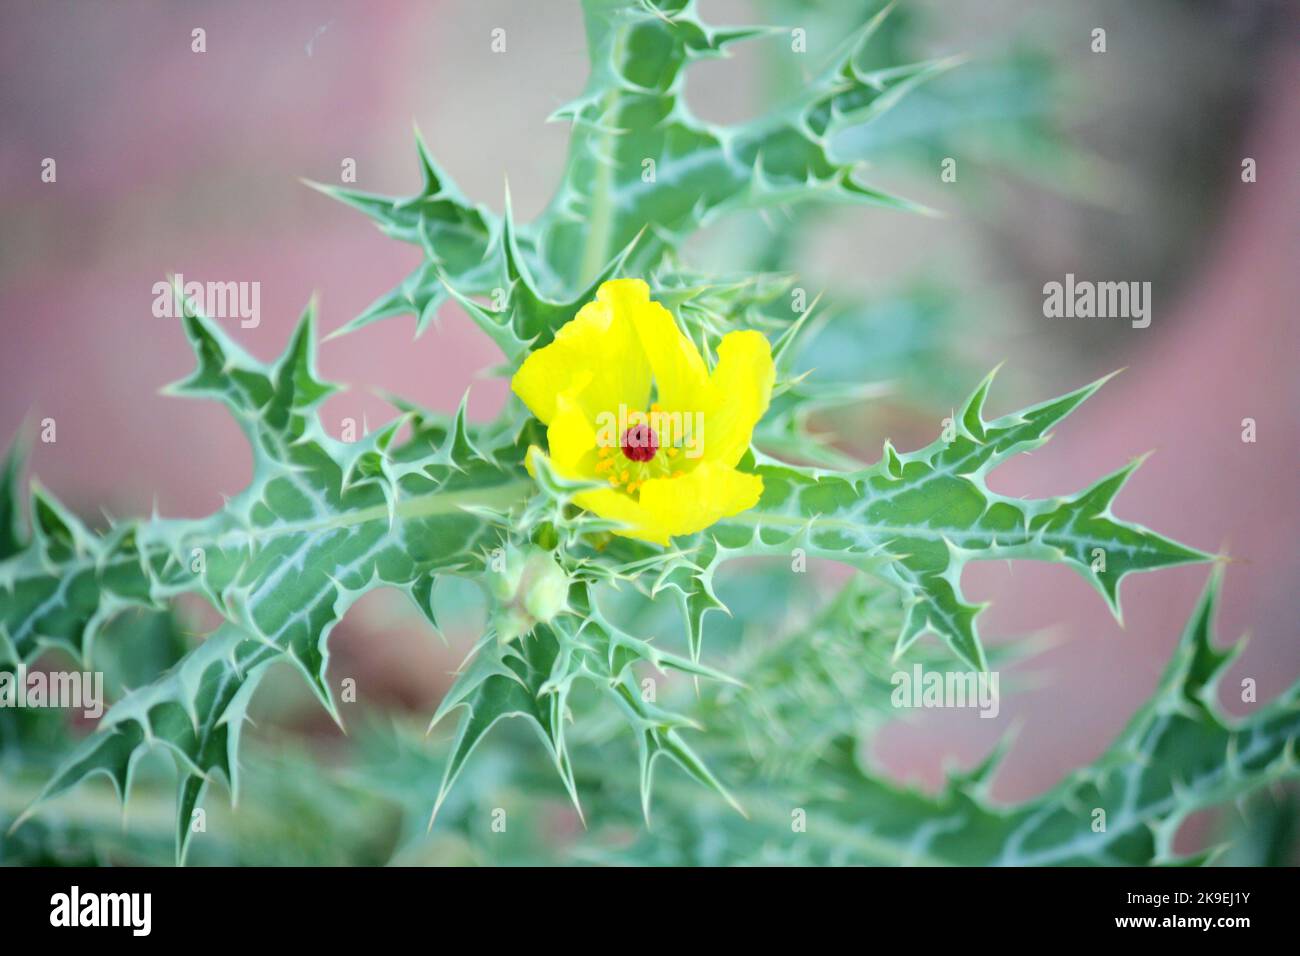 Mexican prickly poppy plant (Argemone Mexicana) with golden flower and green prickly leaves: (pix SShukla) Stock Photo